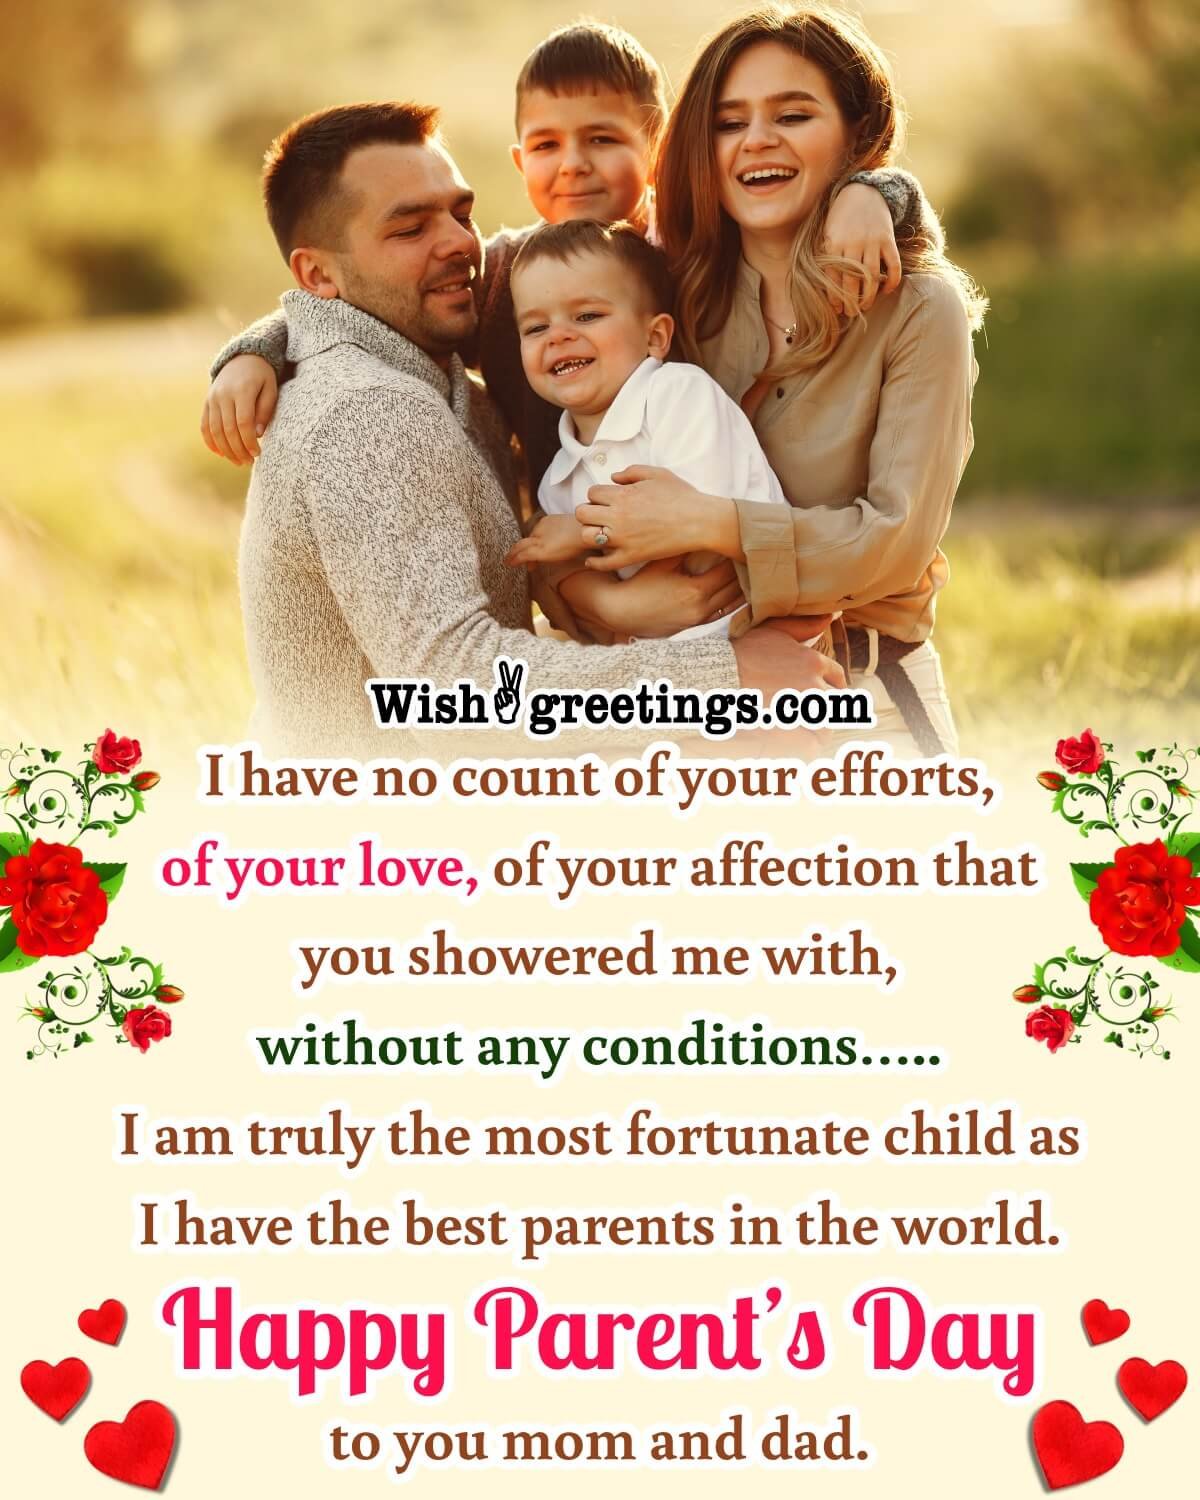 Best Parents Day Wishes For Mom And Dad